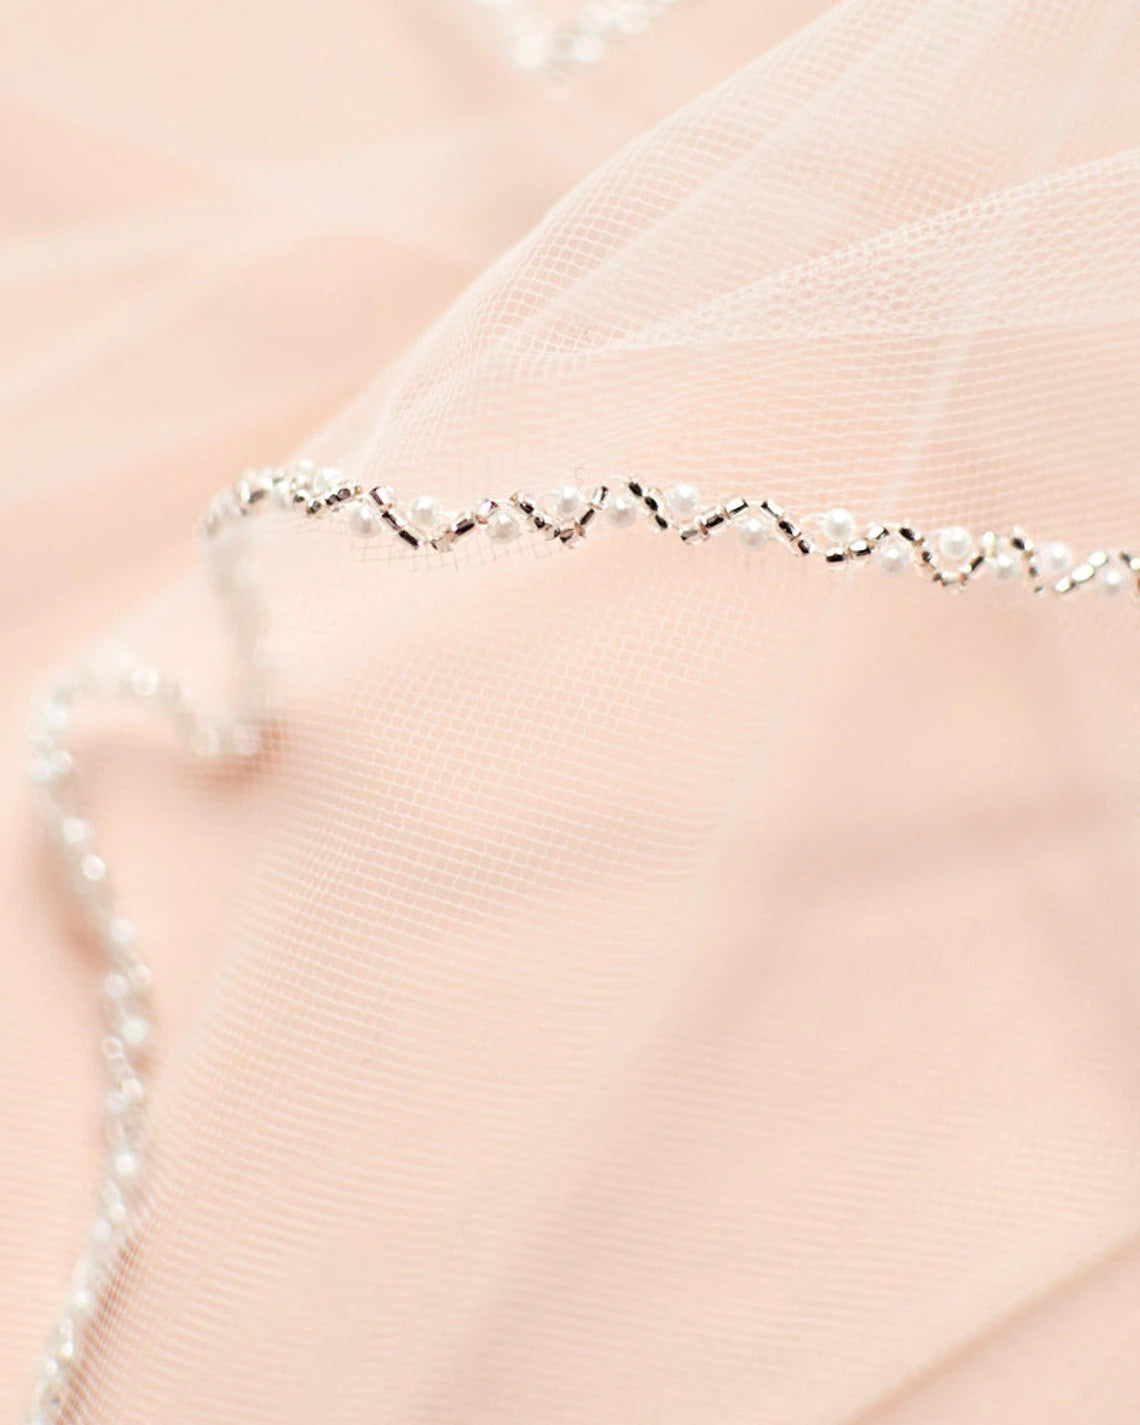 Close-up of a delicate Bergamot Bridal Crystal Organza Beaded Wedding Veil lying on a soft pink tulle fabric, perfect for bridal accessories, focusing on the intricate details of the chain.